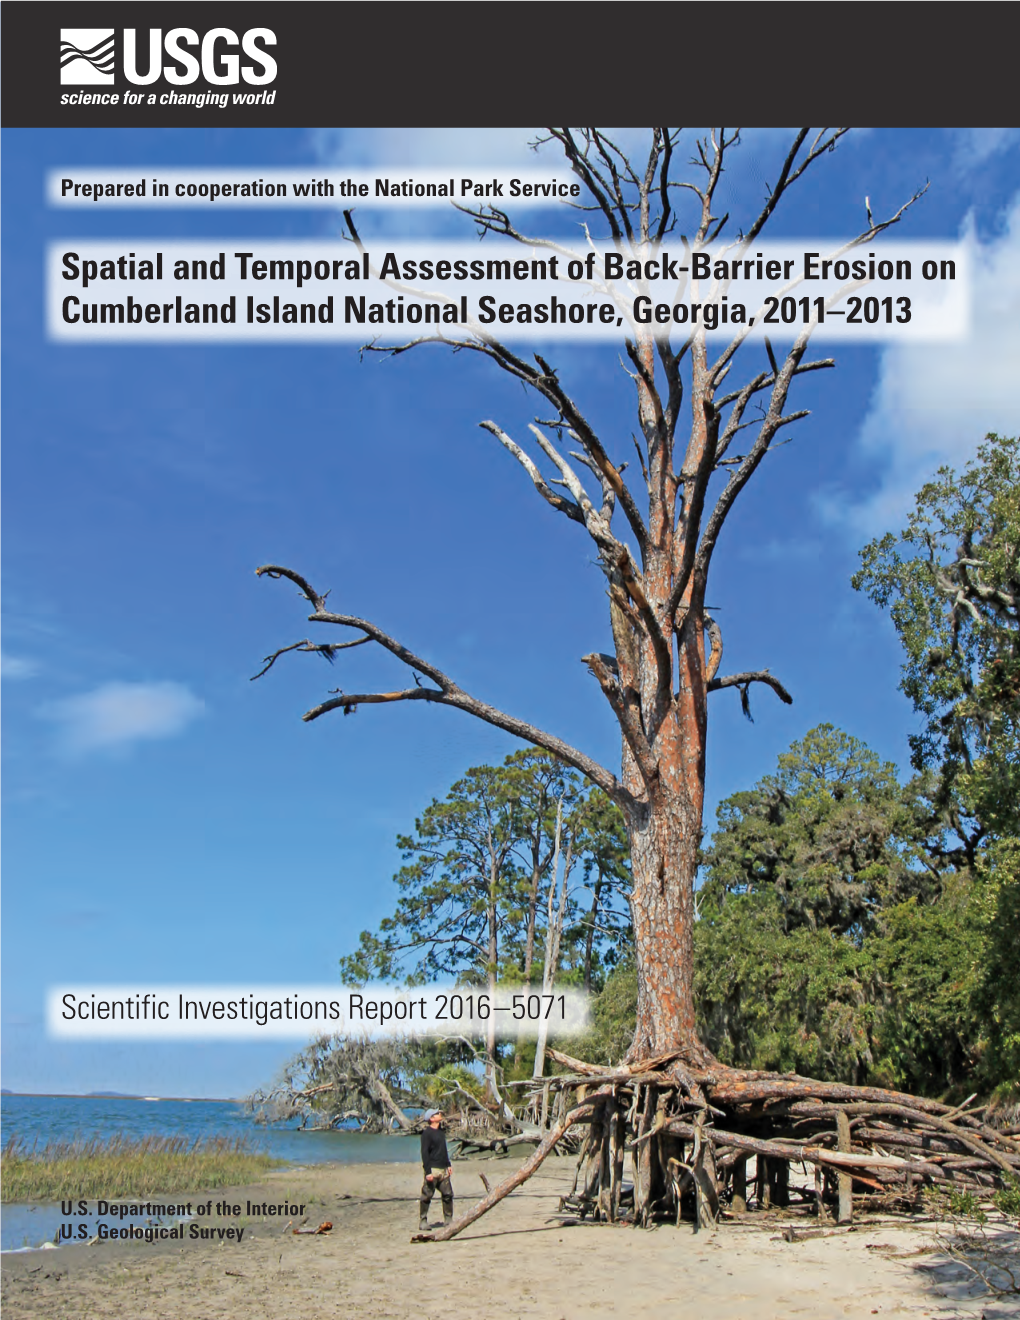 Spatial and Temporal Assessment of Back-Barrier Erosion on Cumberland Island National Seashore, Georgia, 2011–2013